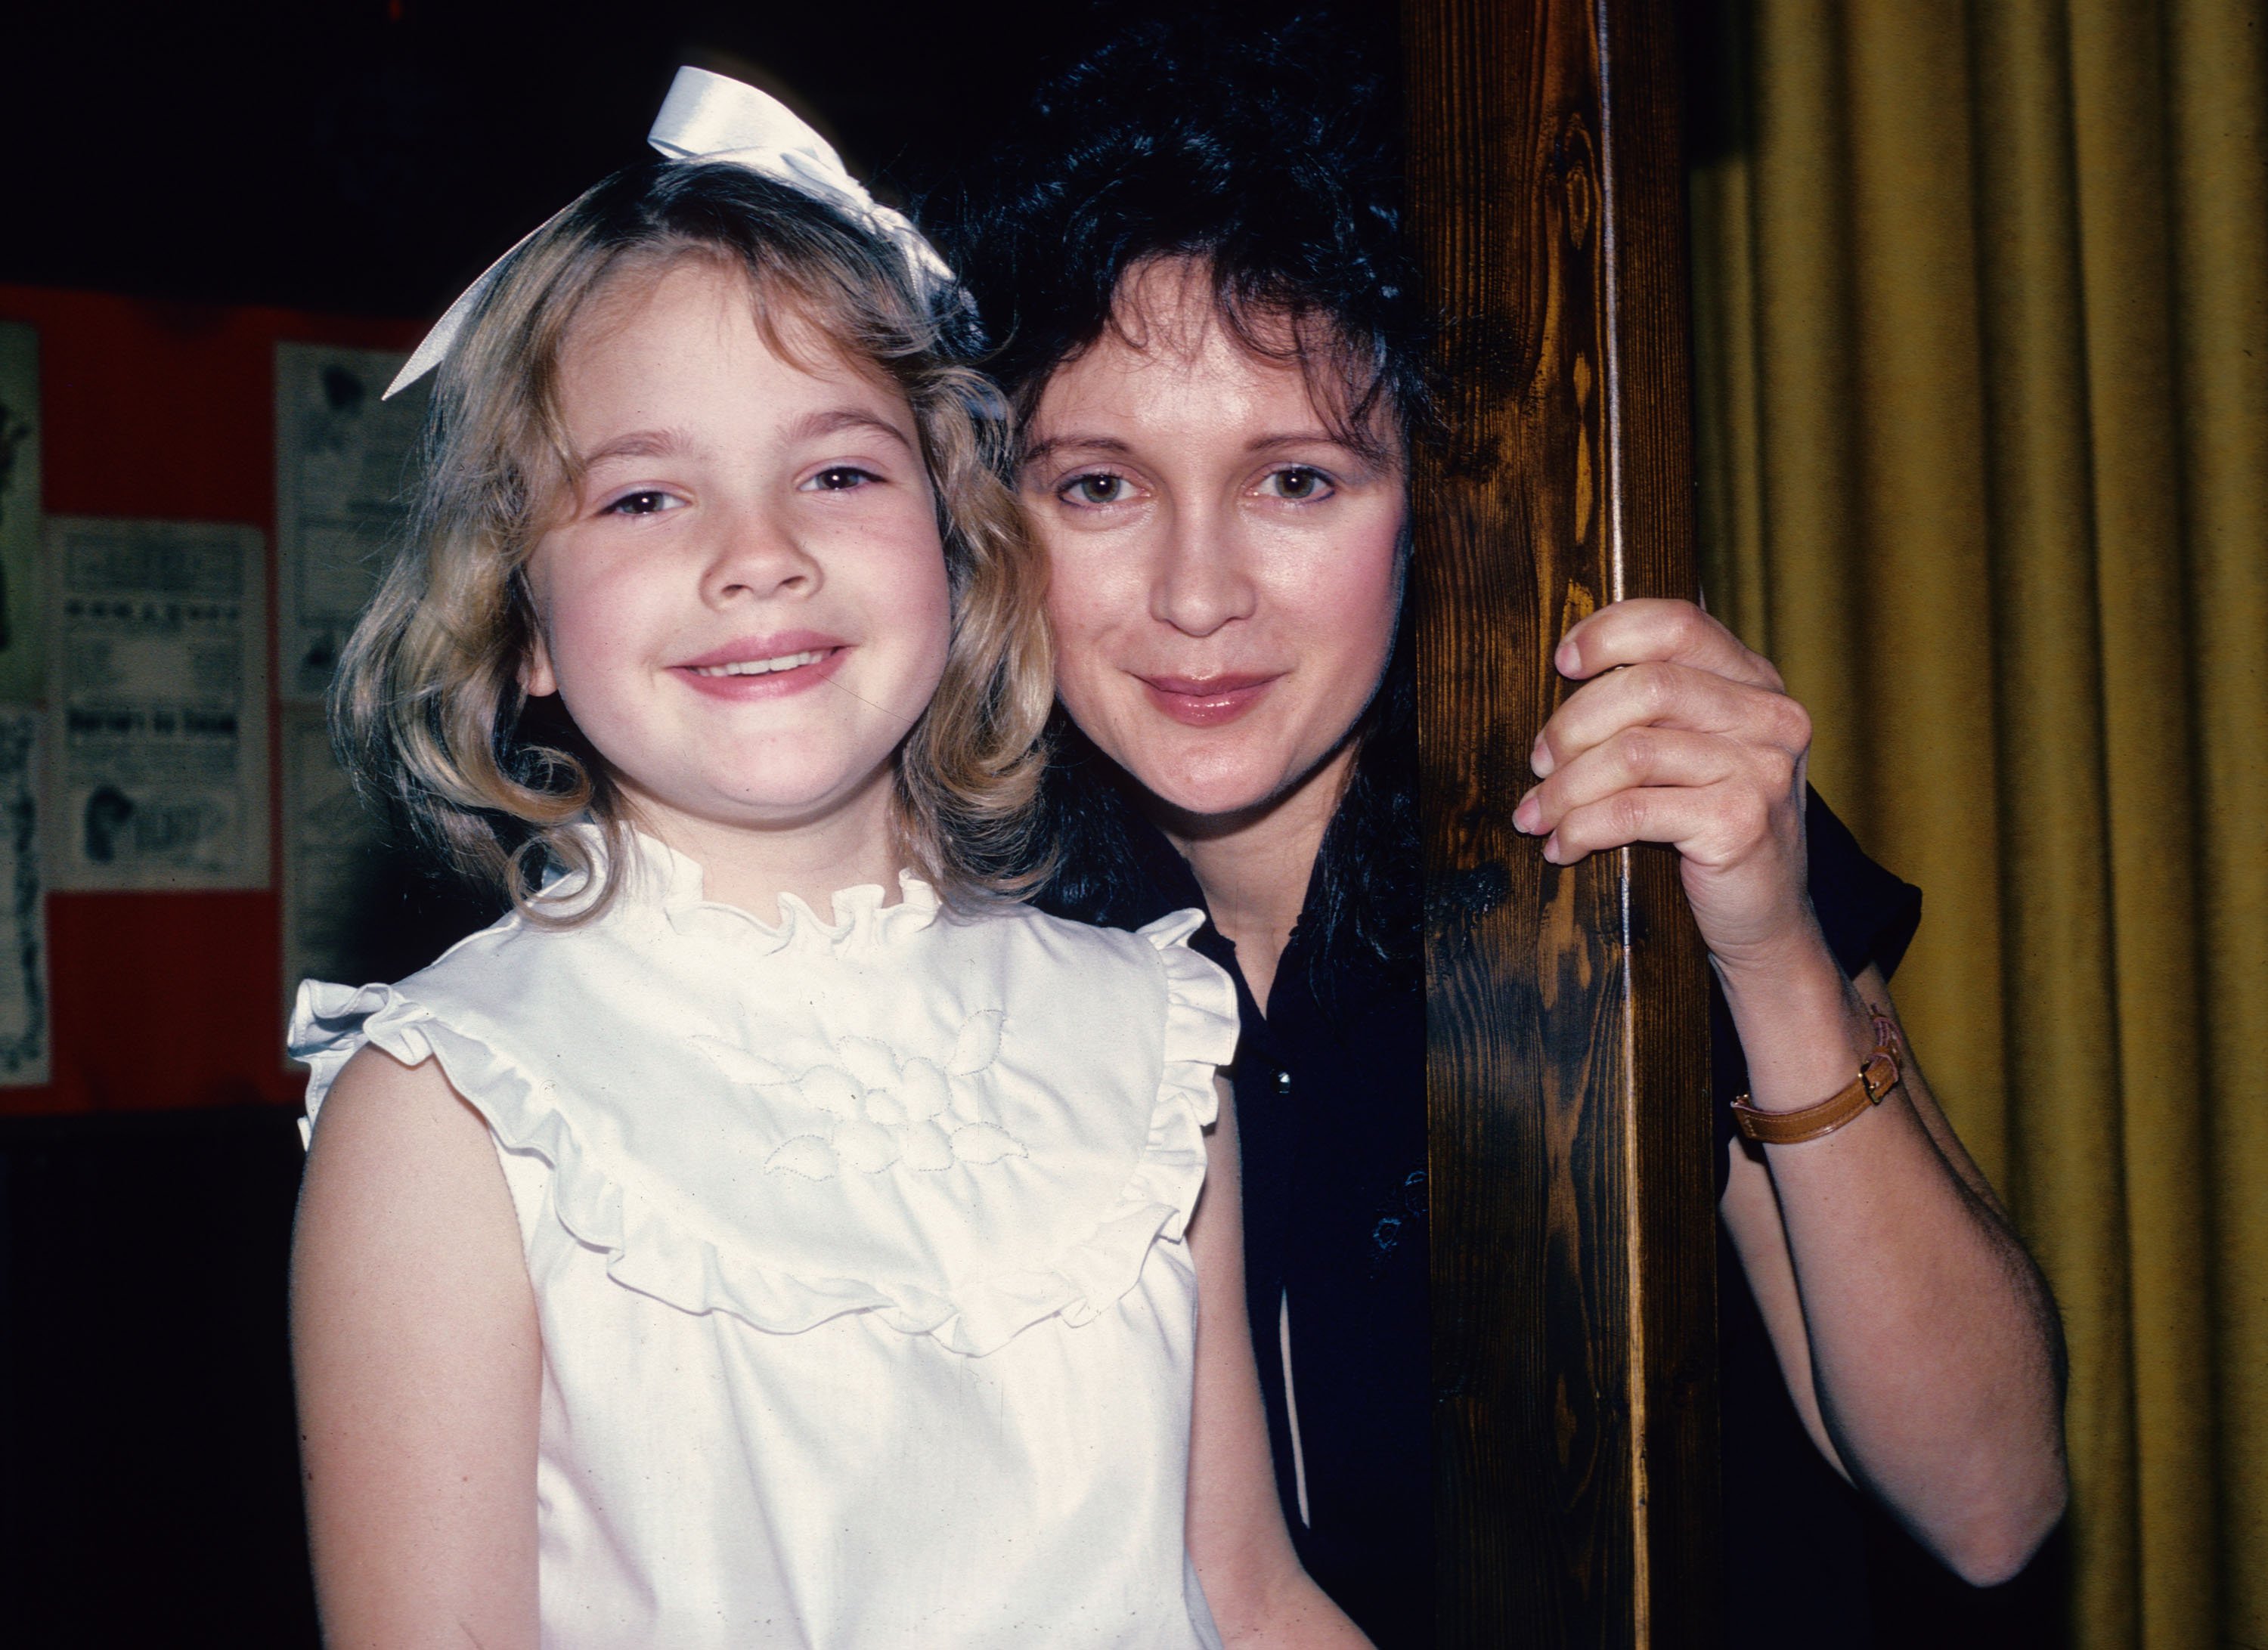 Drew Barrymore poses for a photograph June 8, 1982 with her mother Jaid Barrymore in New York City | Photo: Getty Images